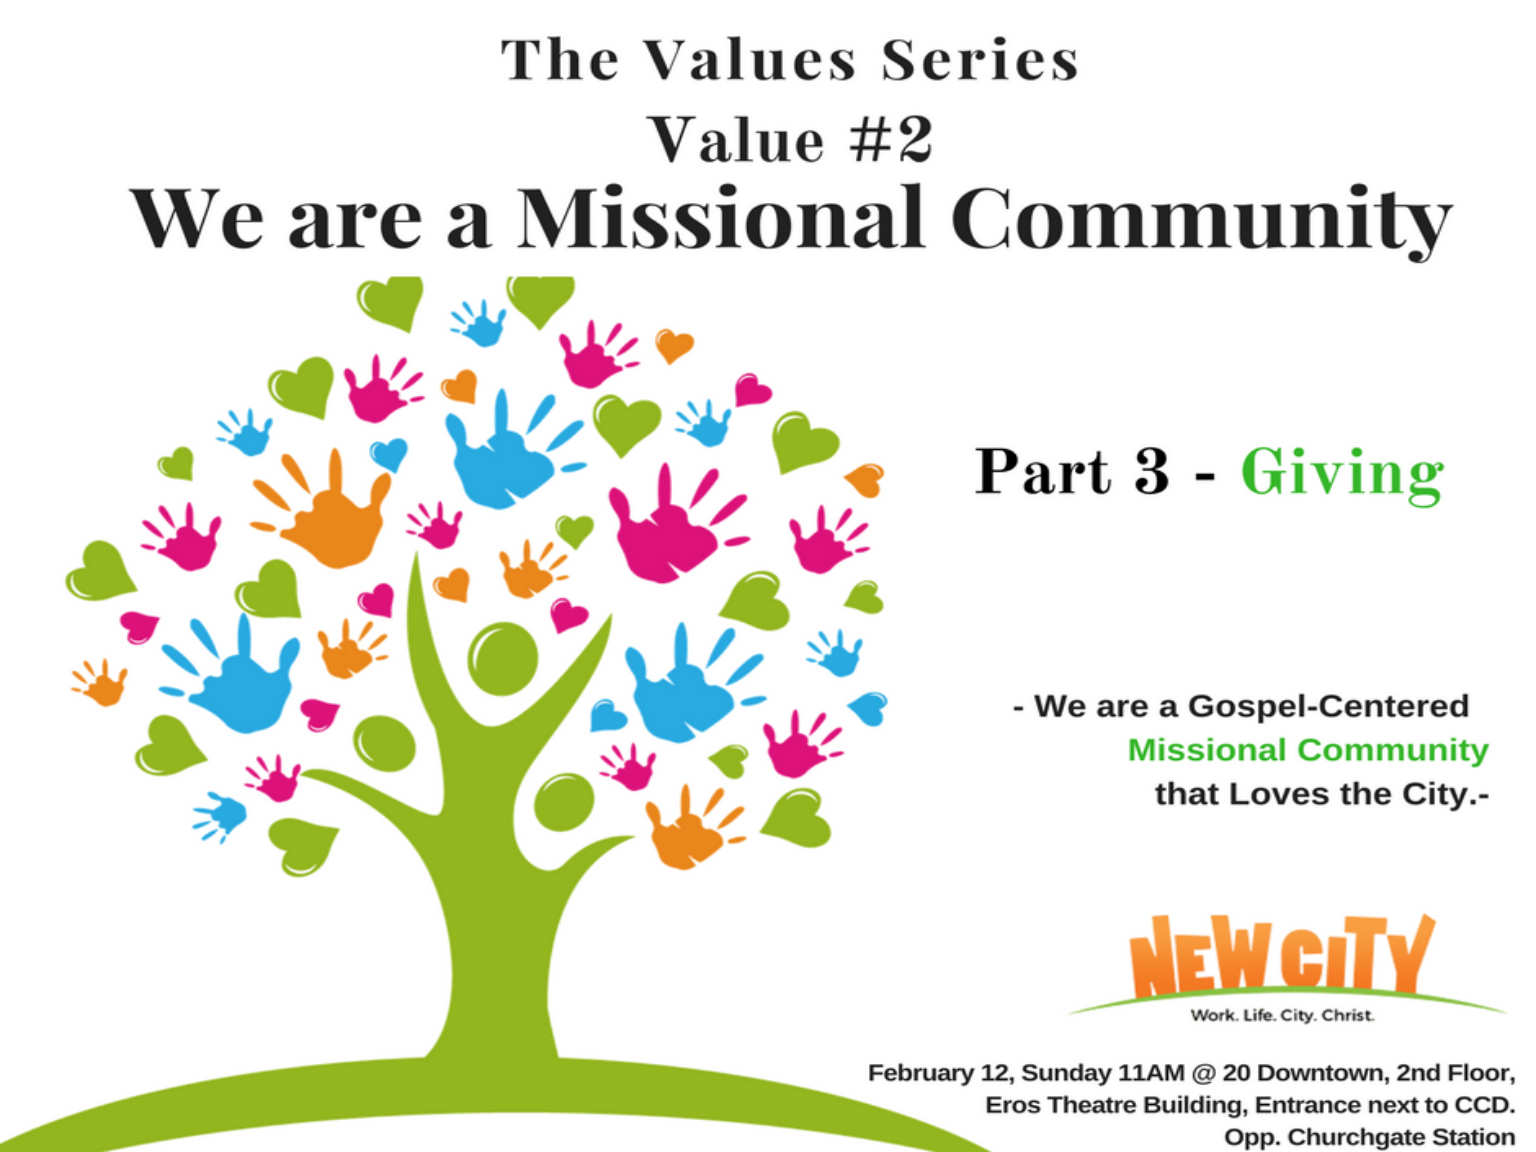 We are Missional Community (Part 3)